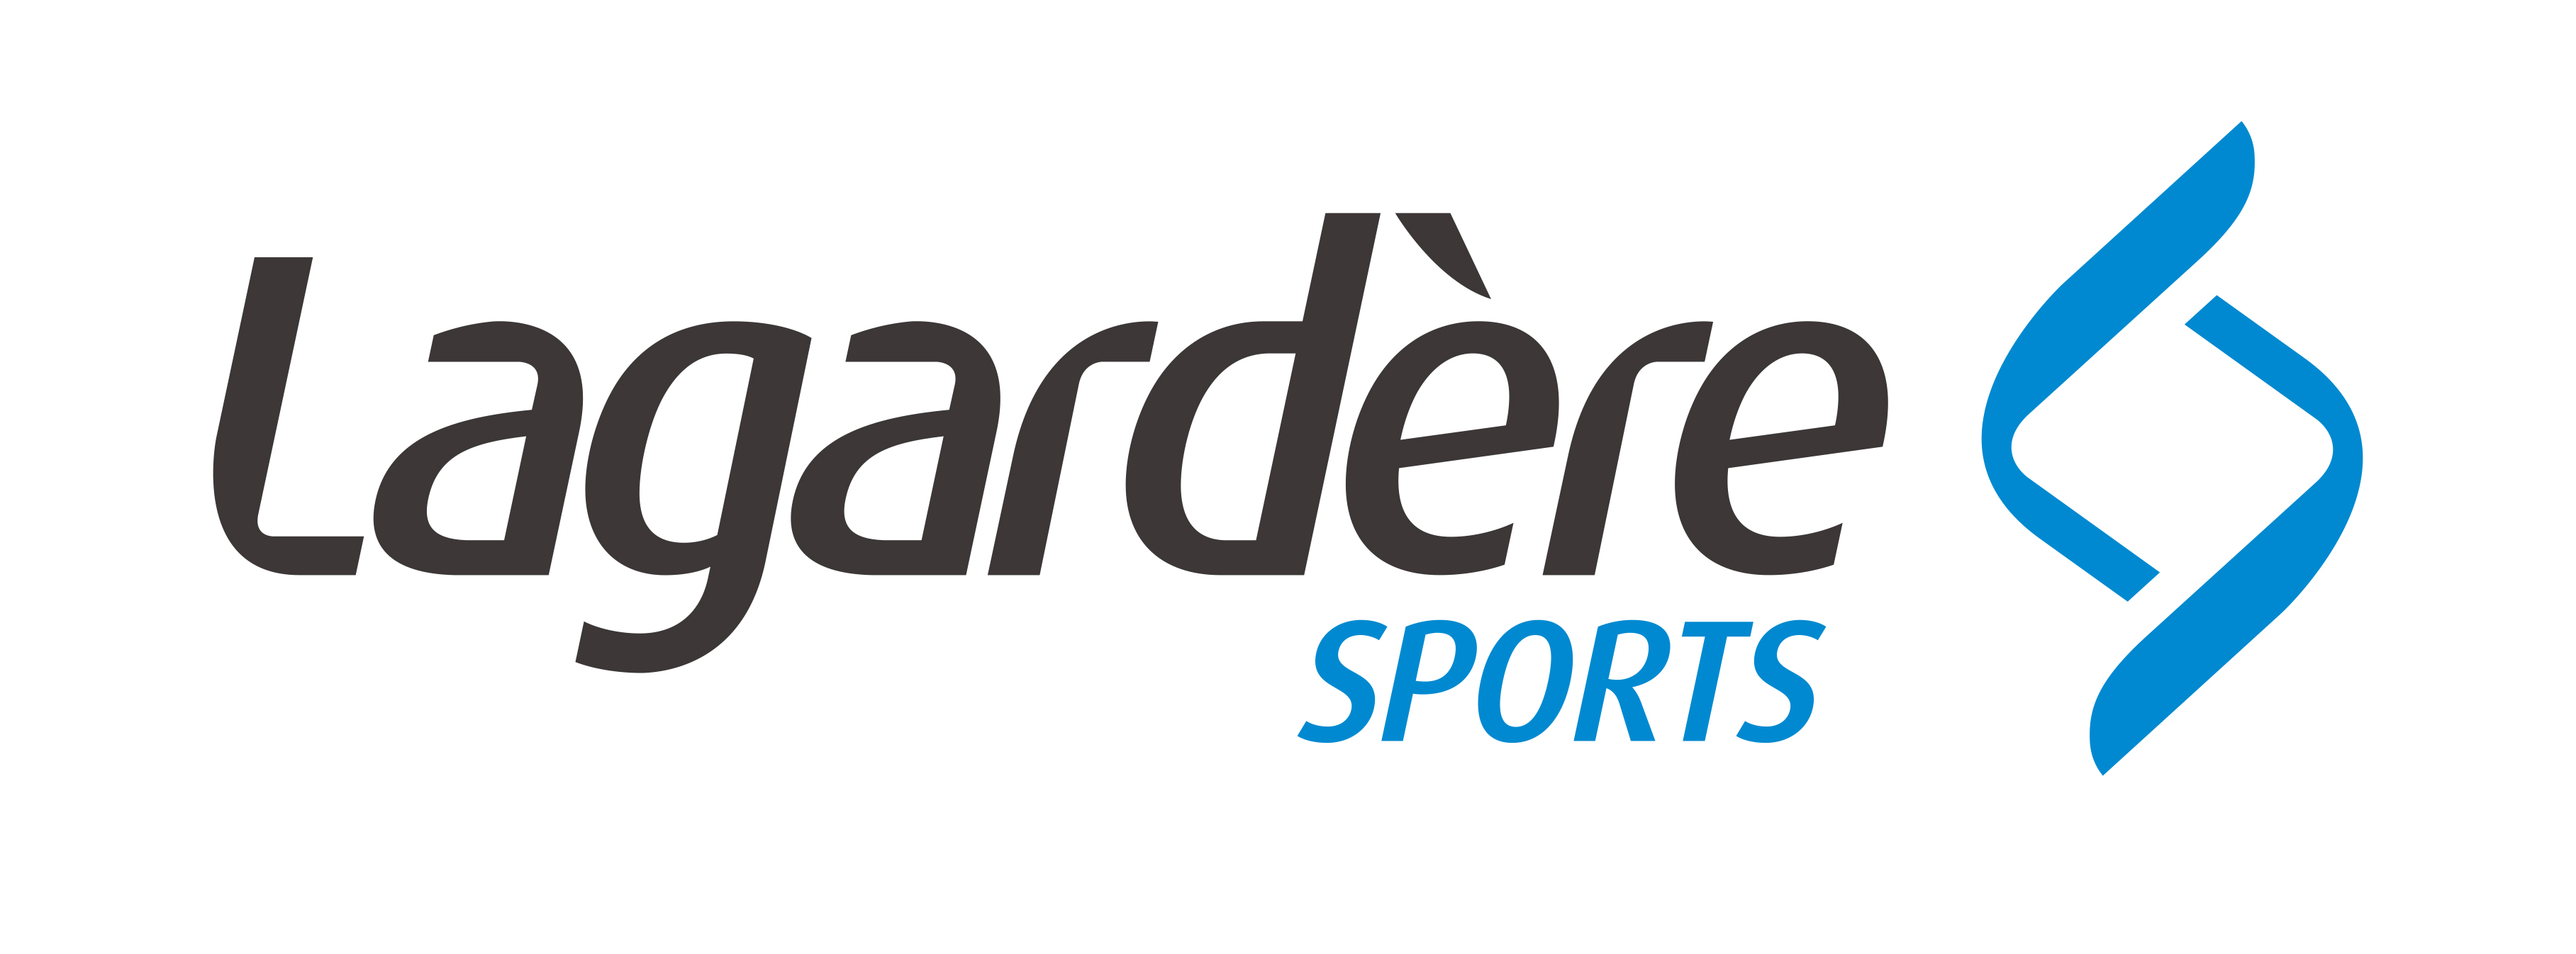 Legadere Sports